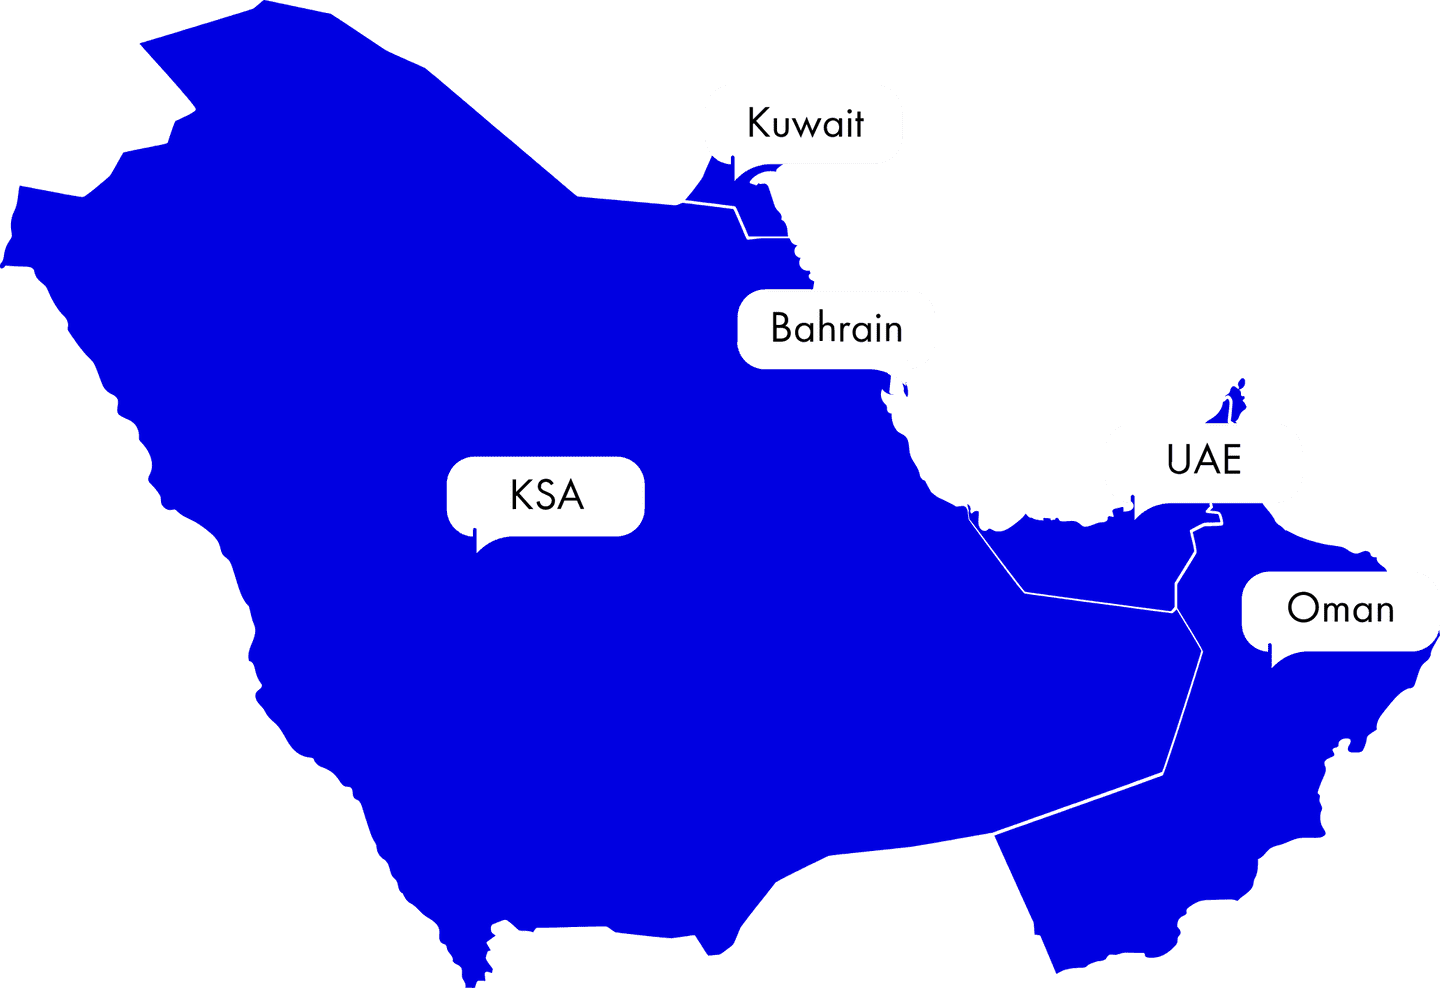 Map of the GCC to represent Shipa Delivery's zone of work